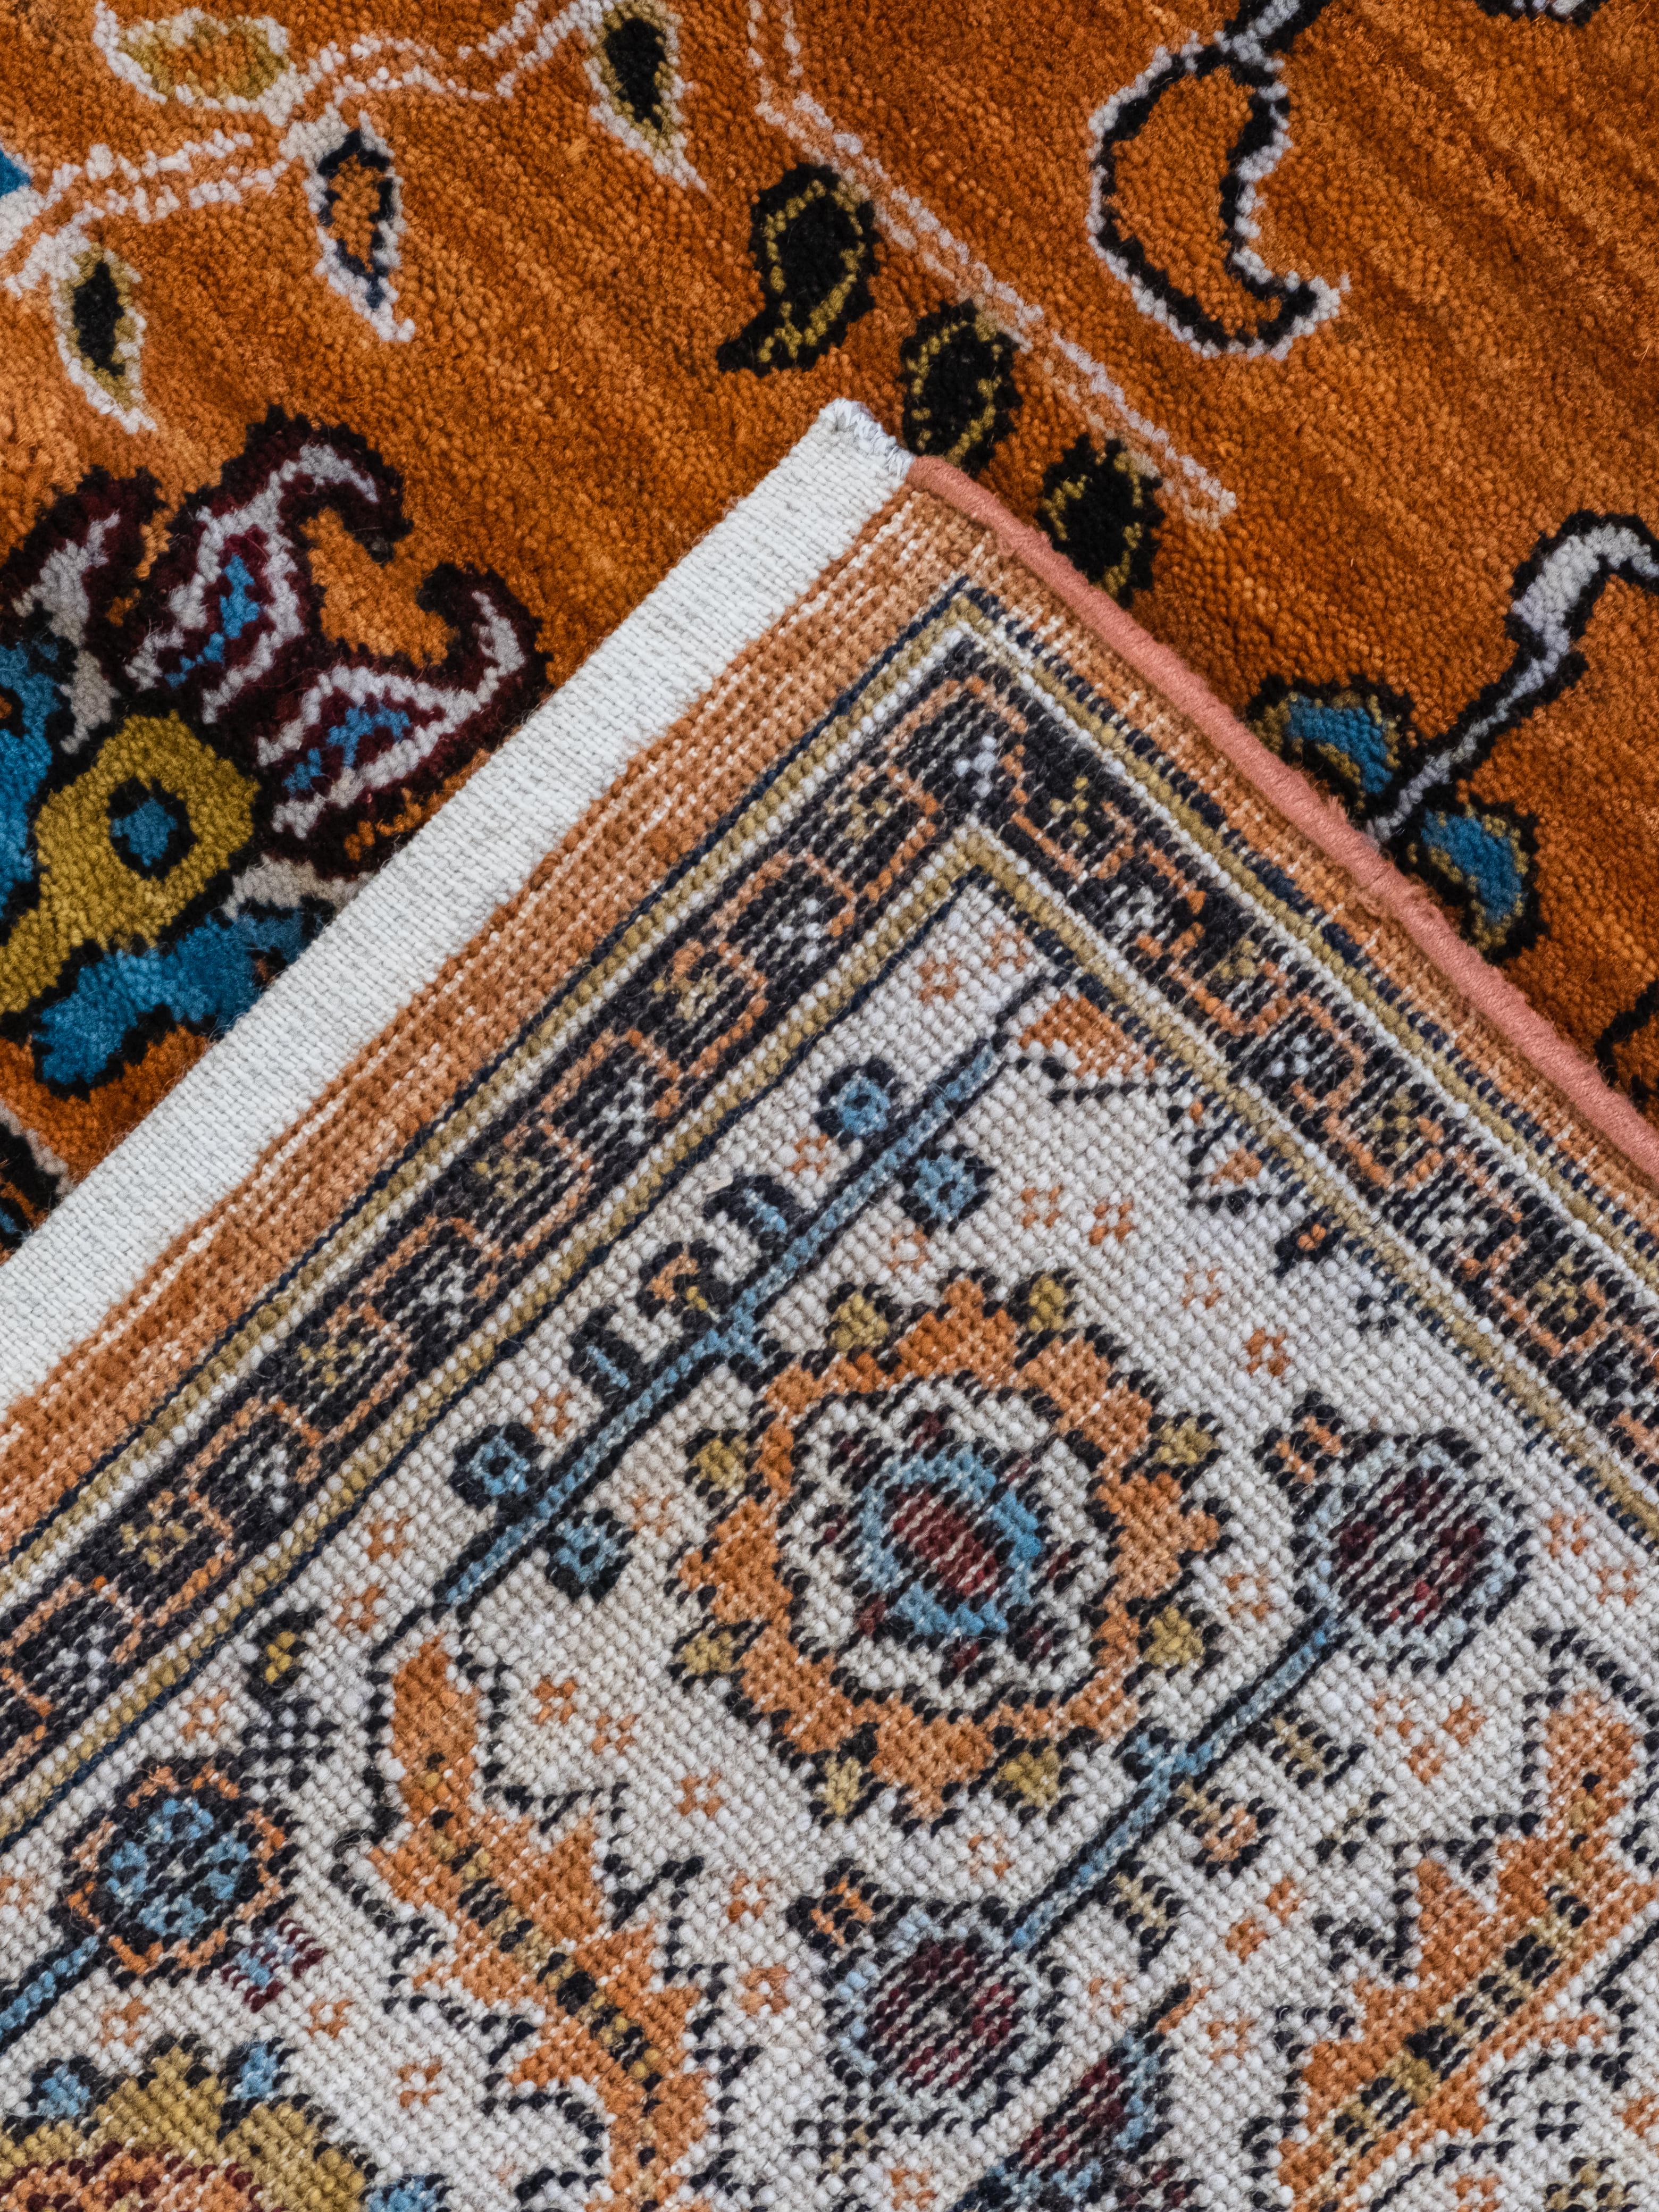 Transitional Orange, Blue, and Cream Persian Area Rug in Pure Wool, 5' x 7' For Sale 2